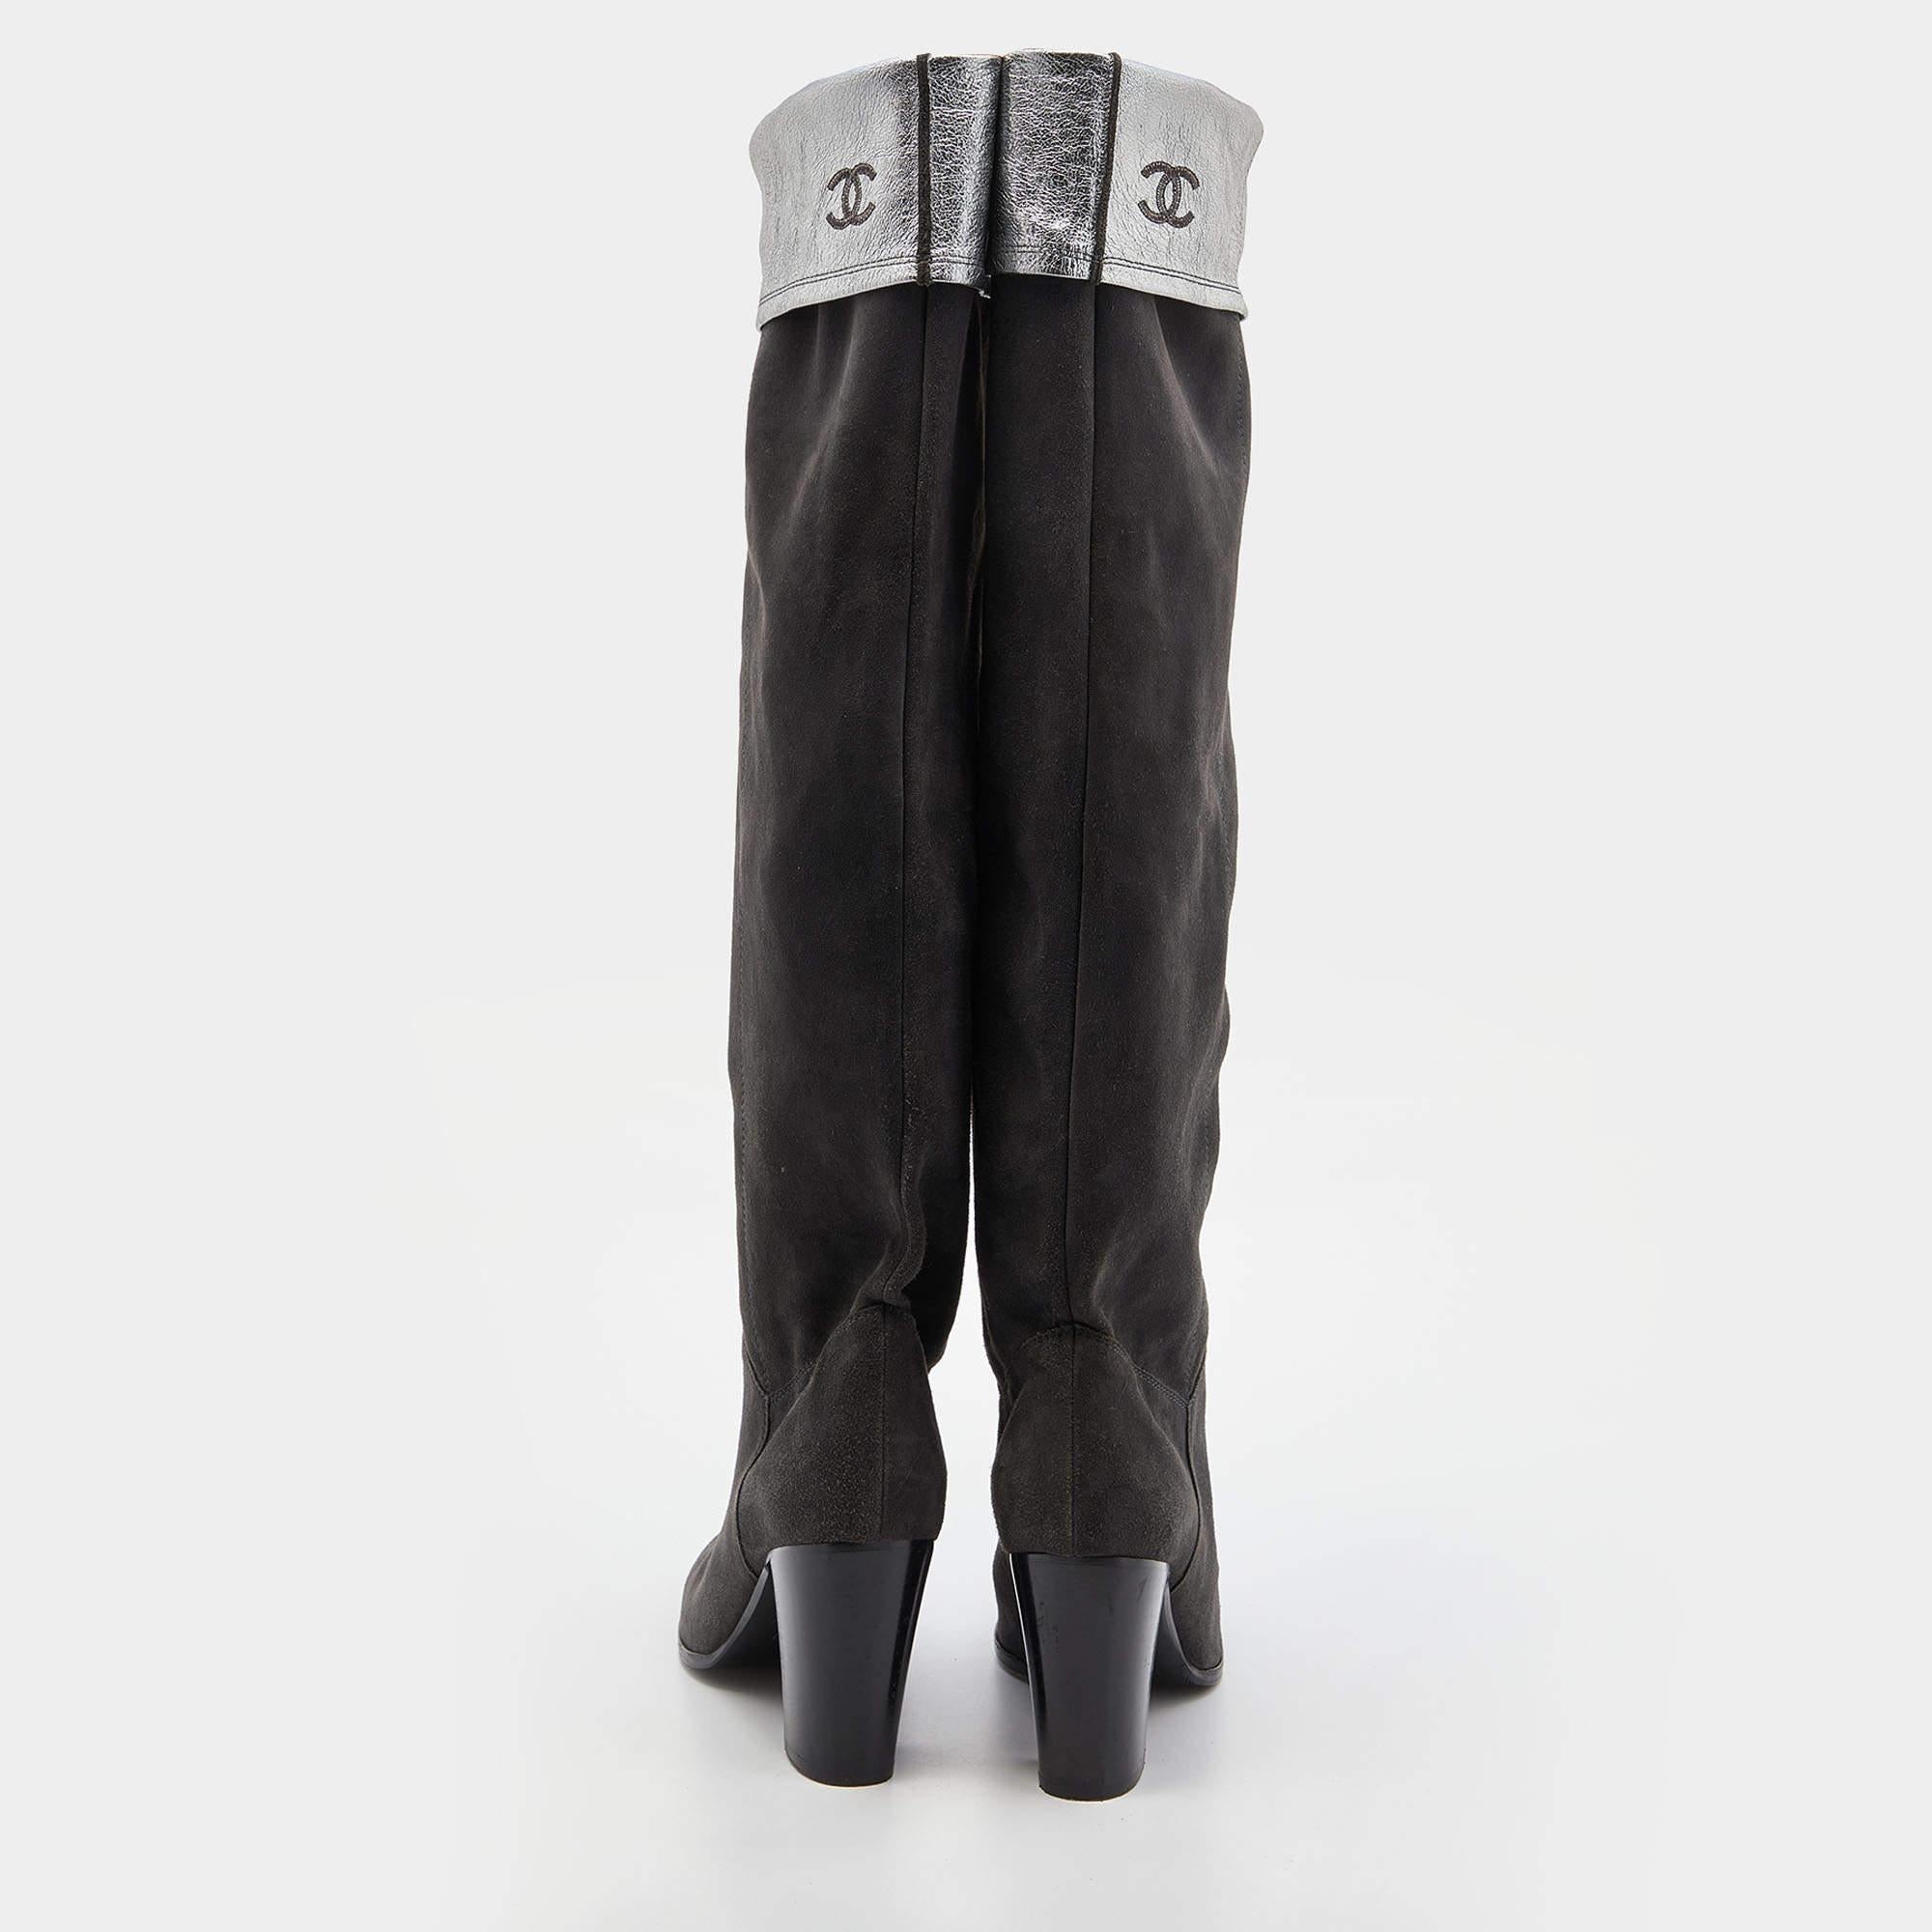 Black Chanel Grey Suede and Leather Knee Length Boots Size 38.5